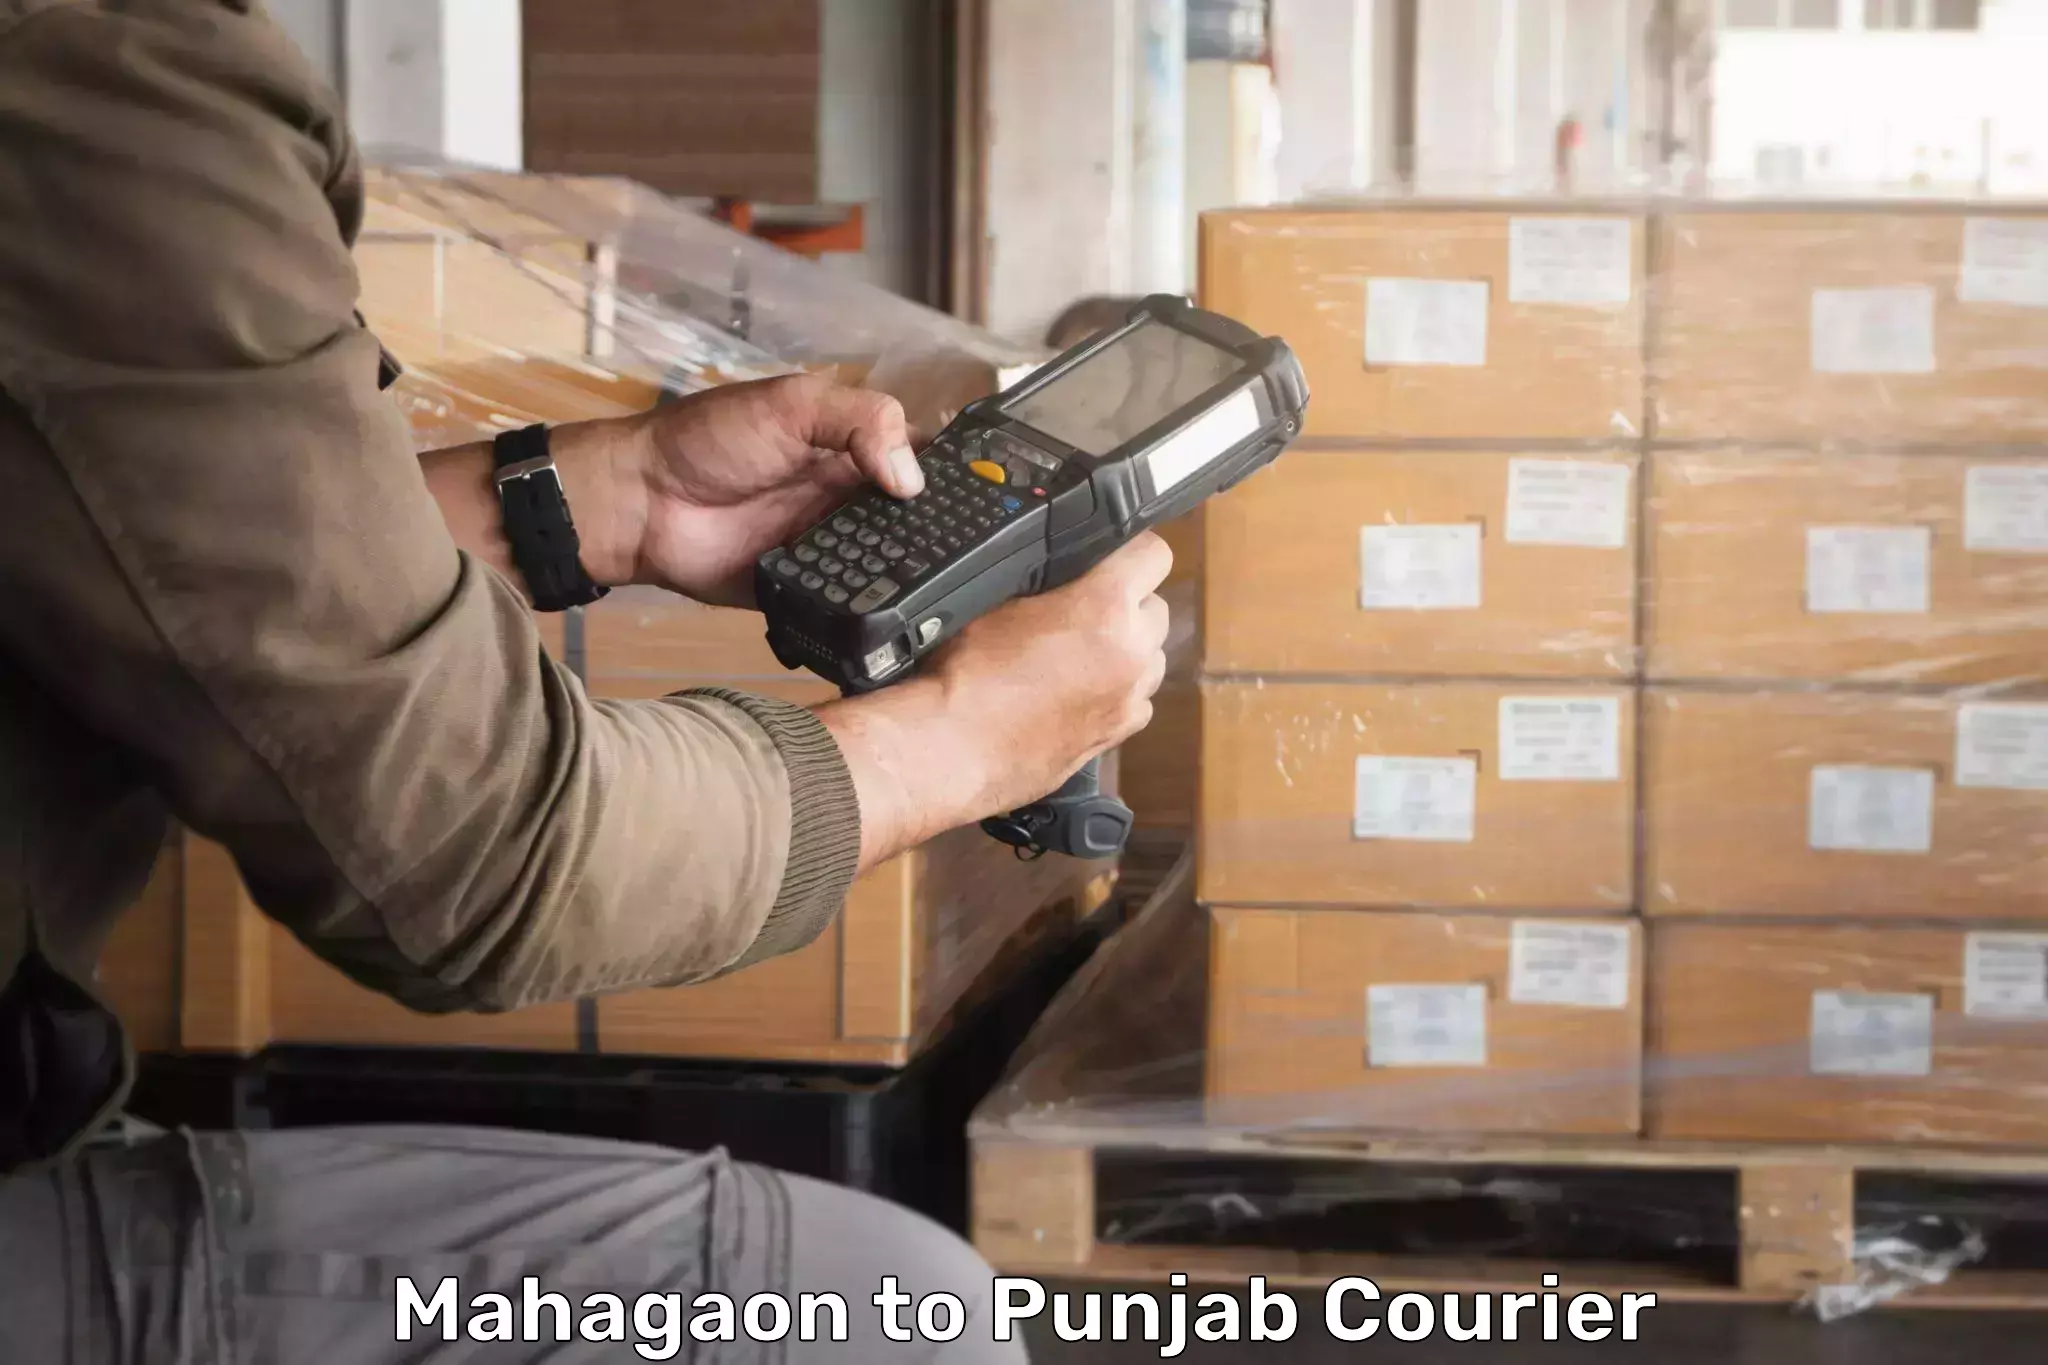 Courier dispatch services Mahagaon to Sirhind Fatehgarh